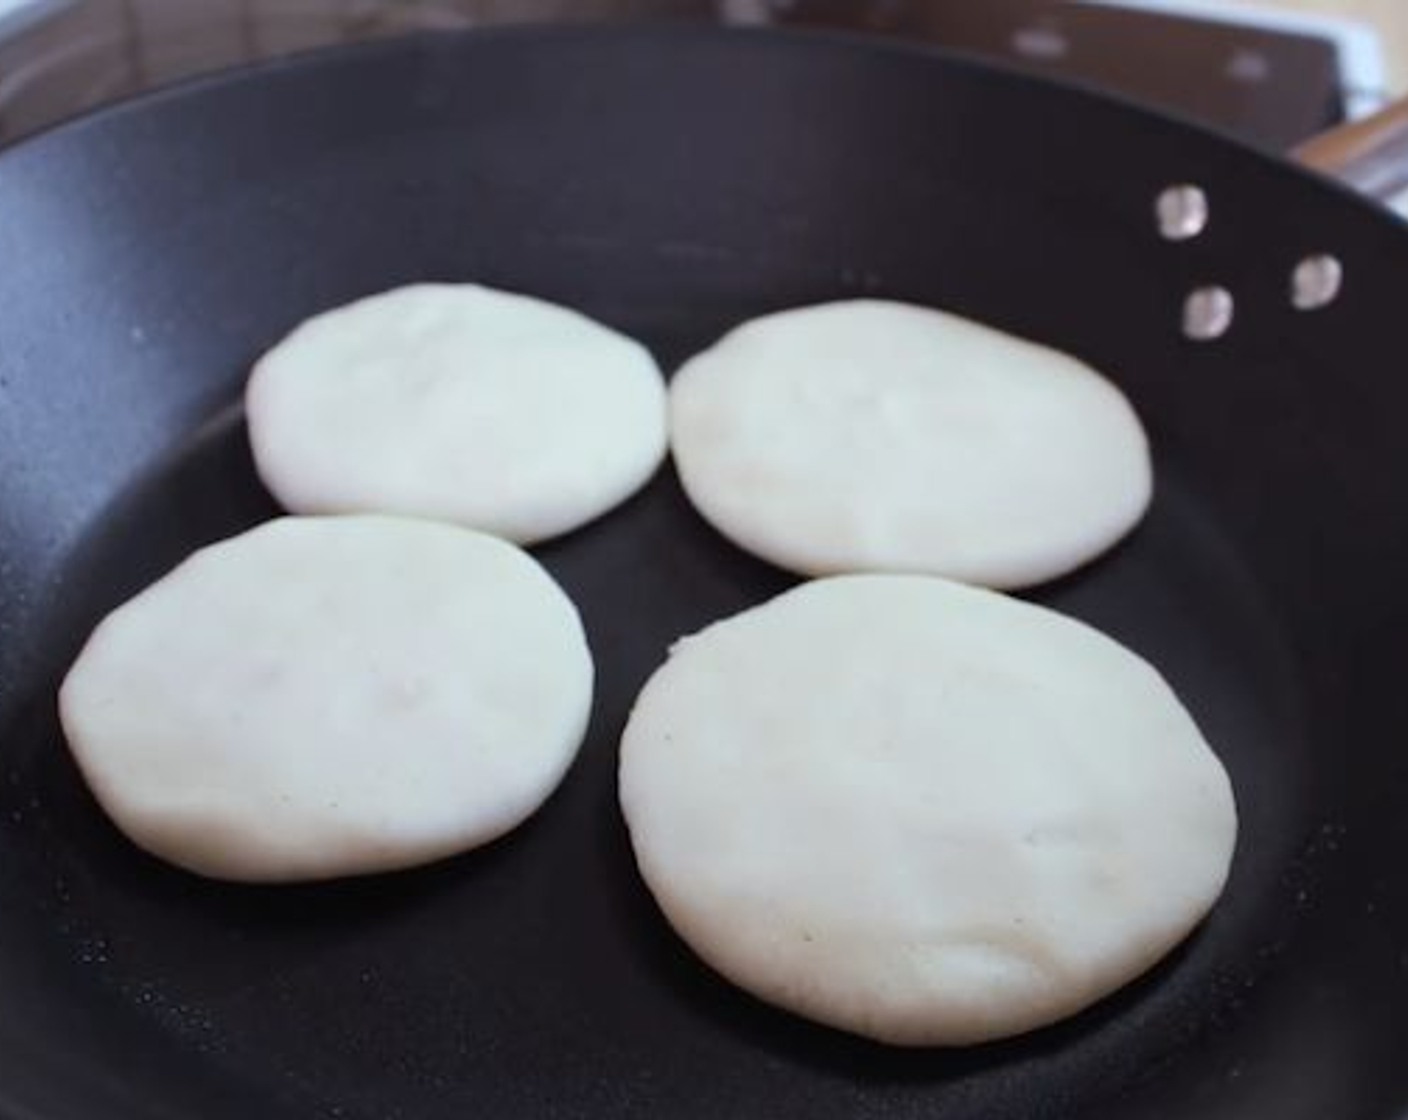 step 4 In a large pan over medium heat, add a little bit of oil and spread using a napkin. Place the arepa down and cook for 5-7 minutes without moving them.